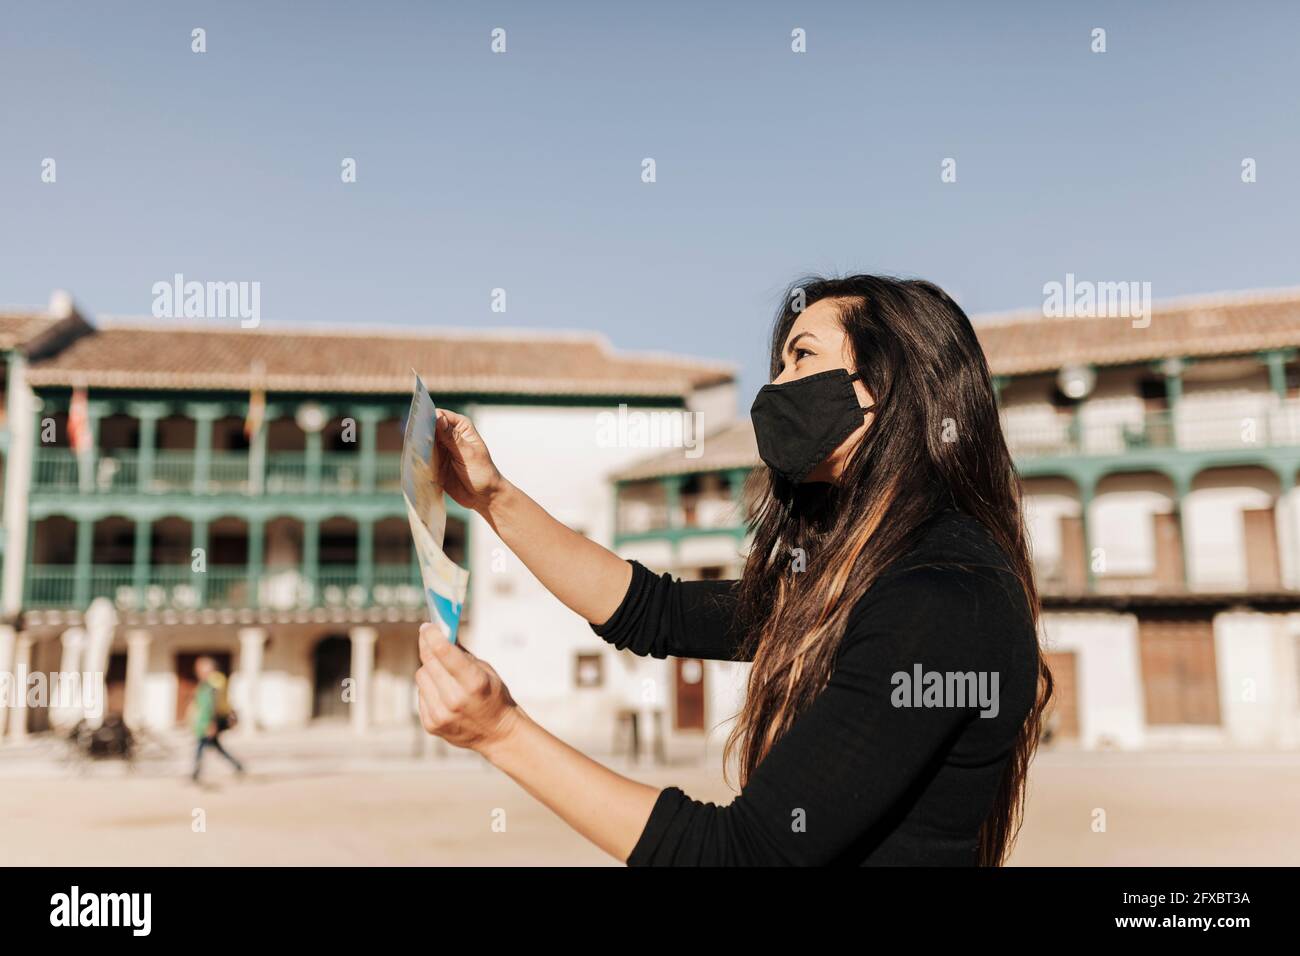 Tourist wearing protective face mask checking map Stock Photo